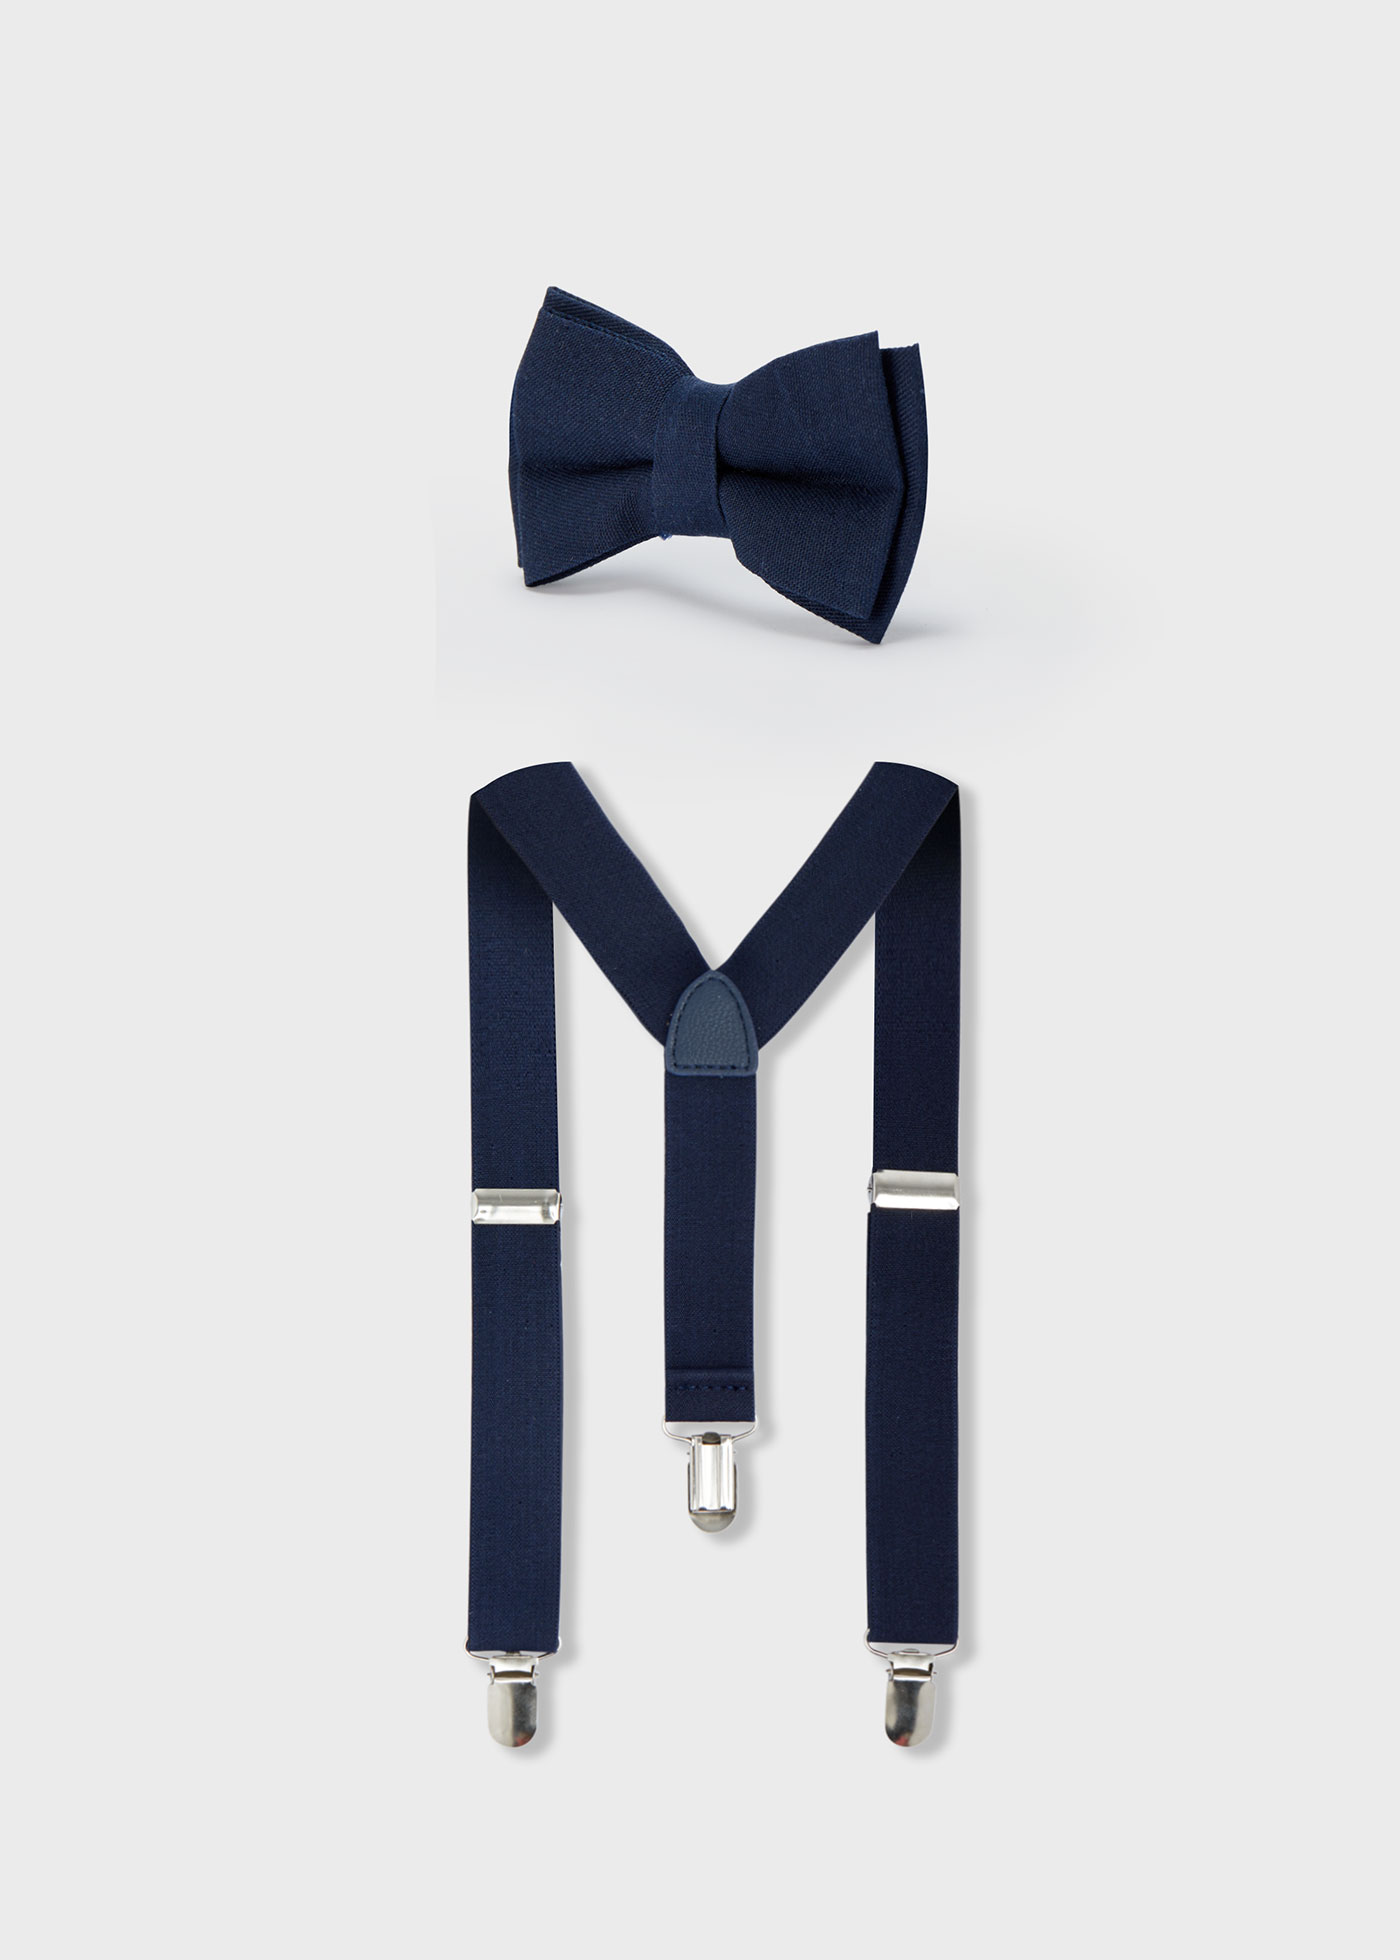 Boys bow tie and suspenders set